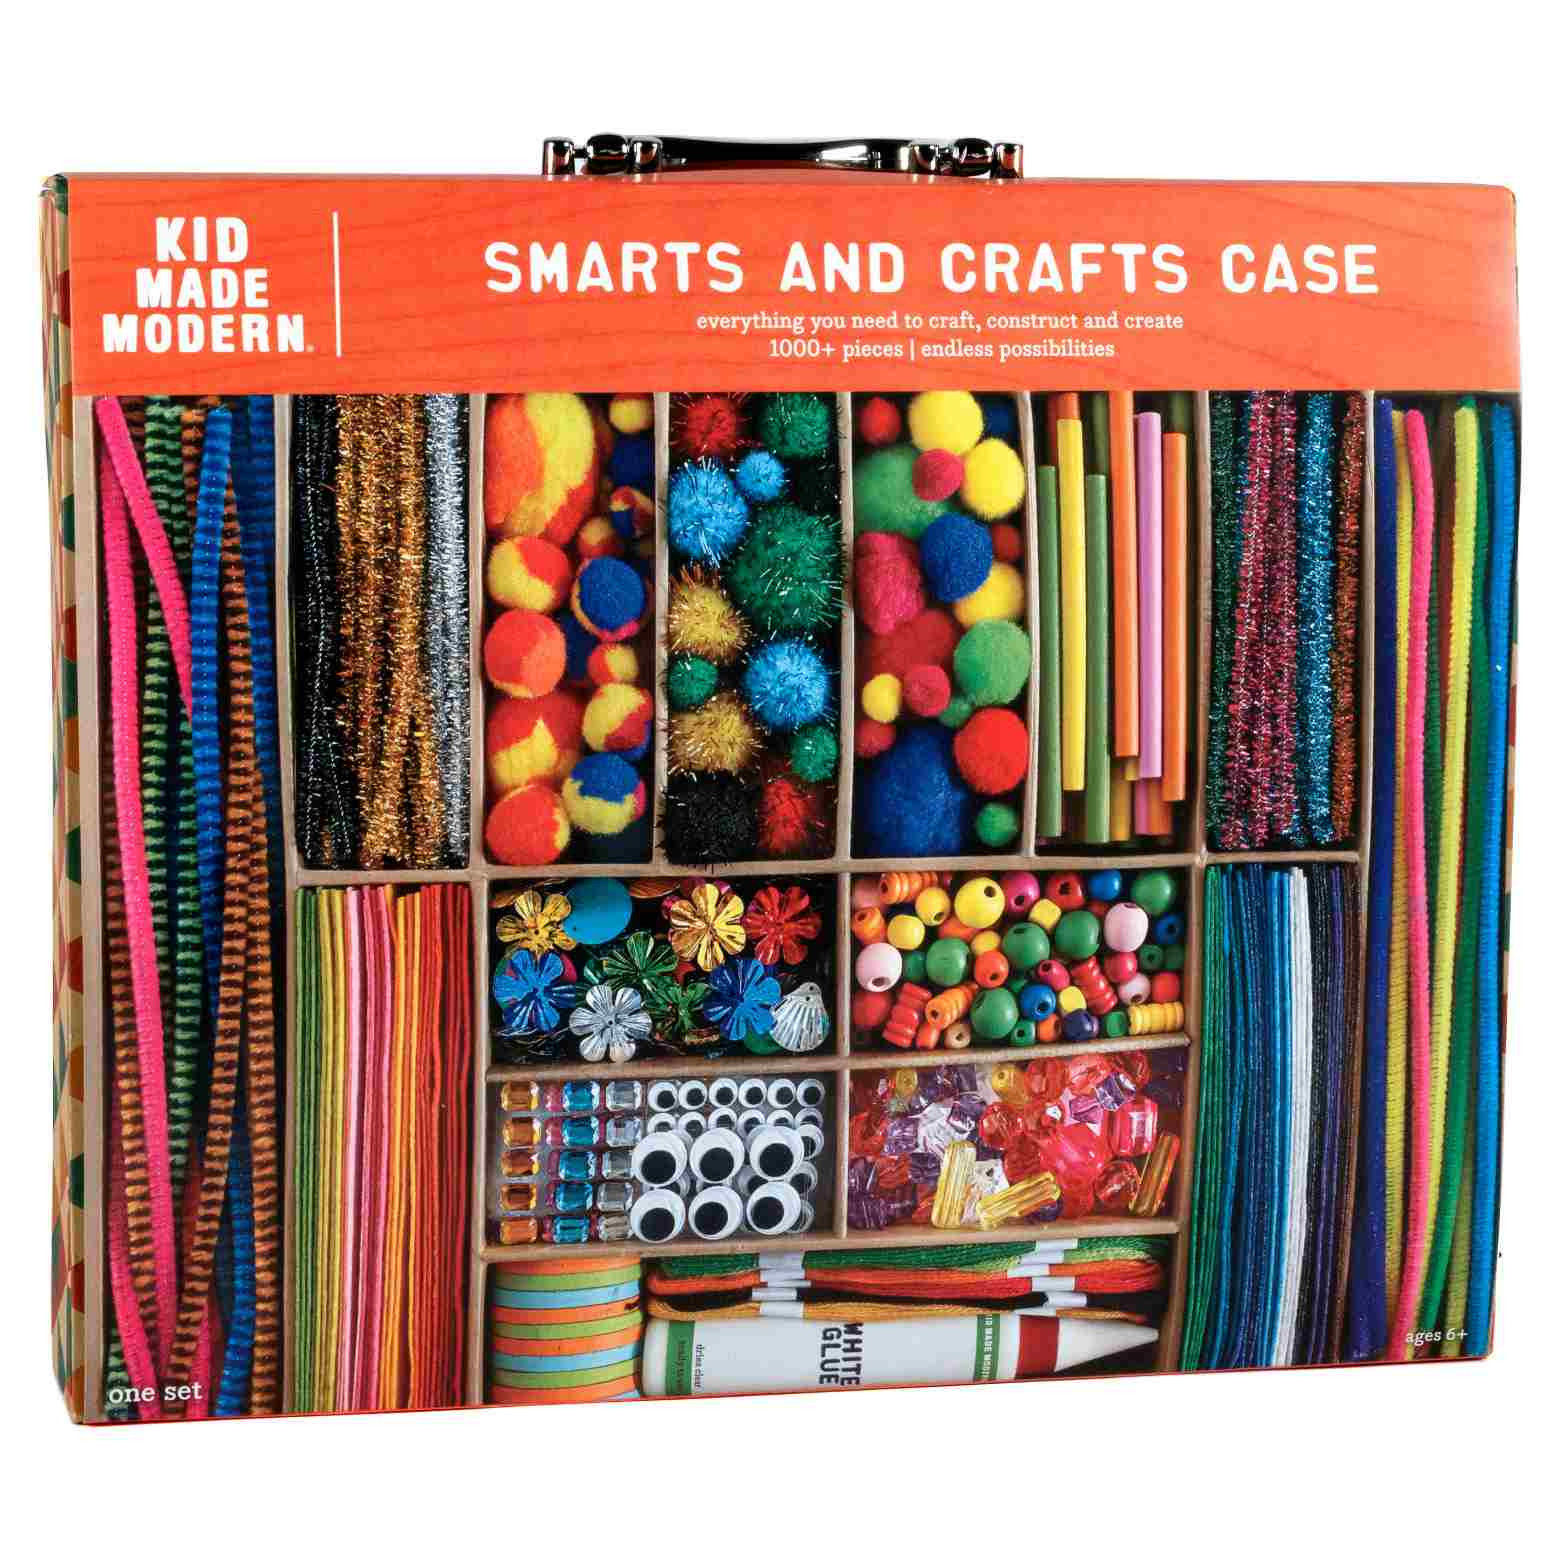 Craft Sets For Toddlers
 The 9 Best Craft Kits for Kids in 2020